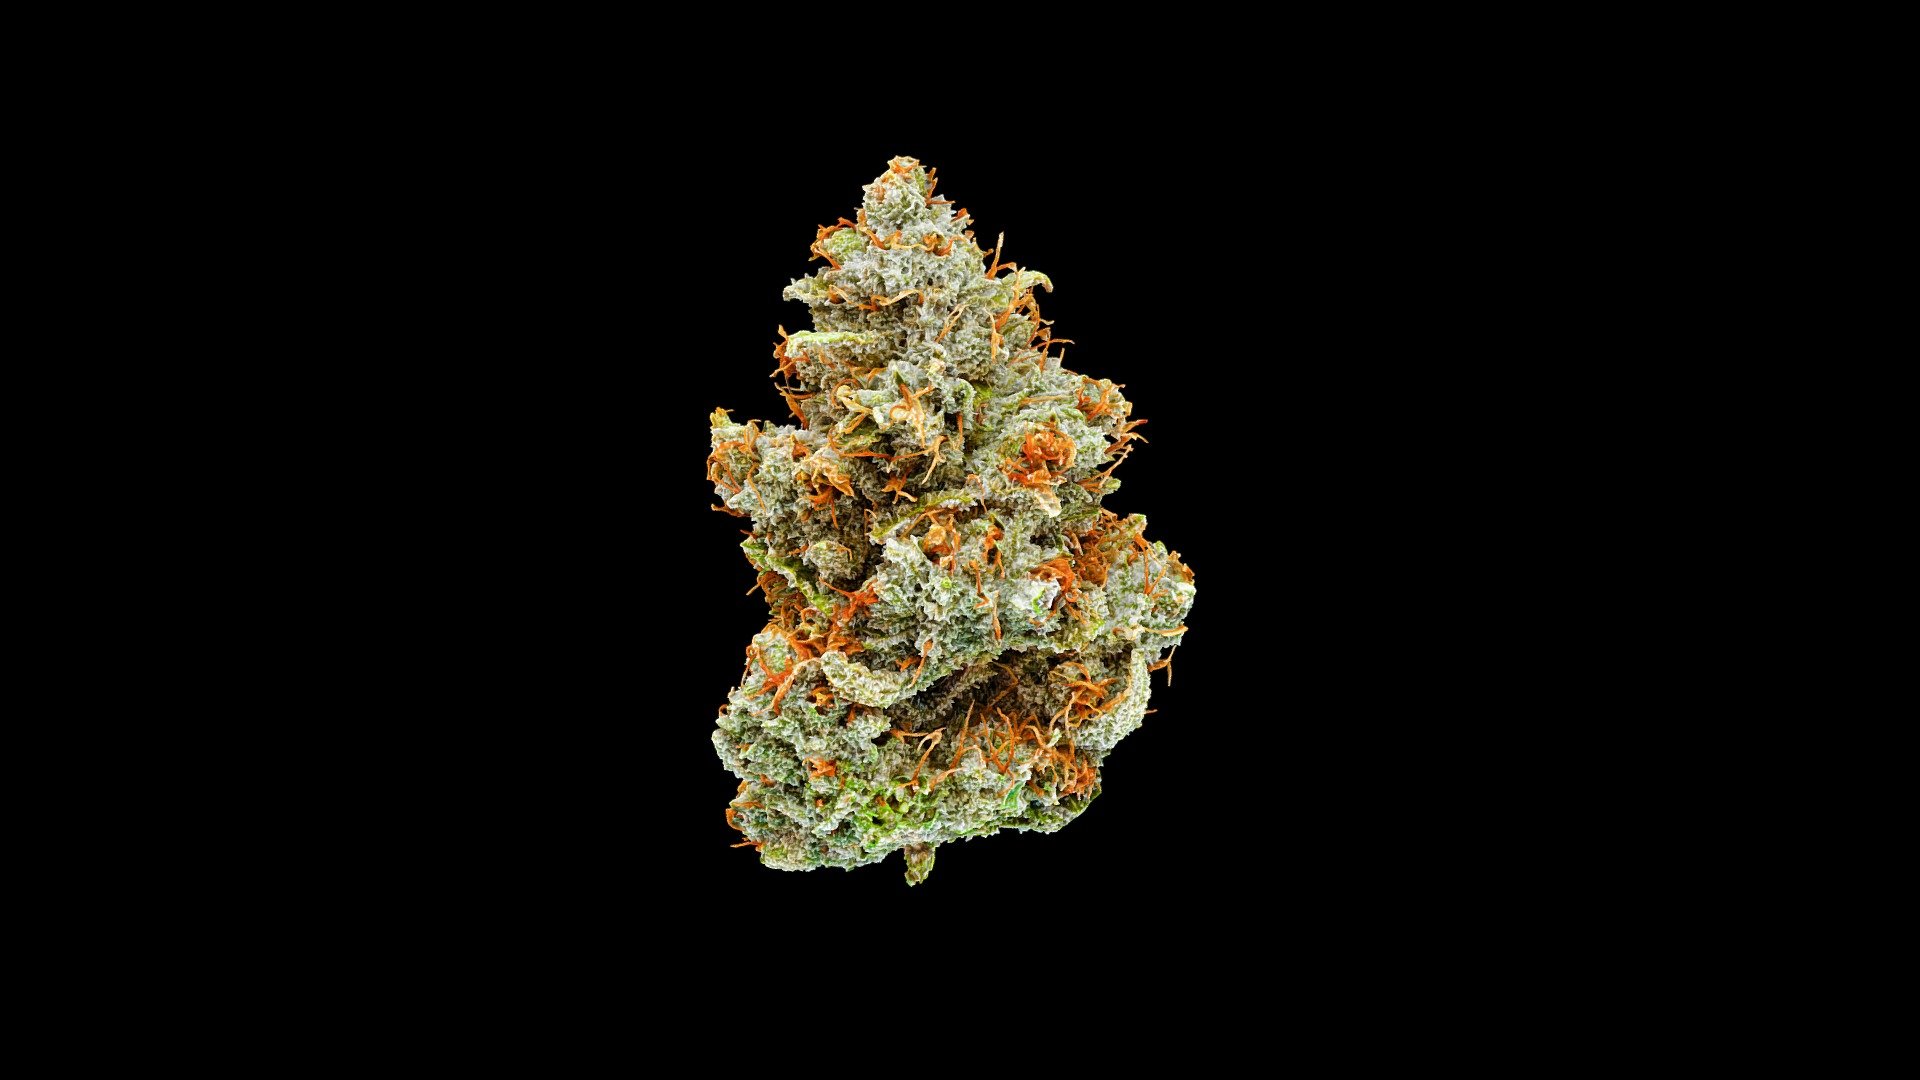 Cannabis bud, Truffle Monkey strain, created using photogrammetry. To be used as part of an NFT collection, and for demonstrating 3D cannabis menu capabilities.

Equipment used: Sony A7R IV, 3DS Max.

Not for sale 3d model